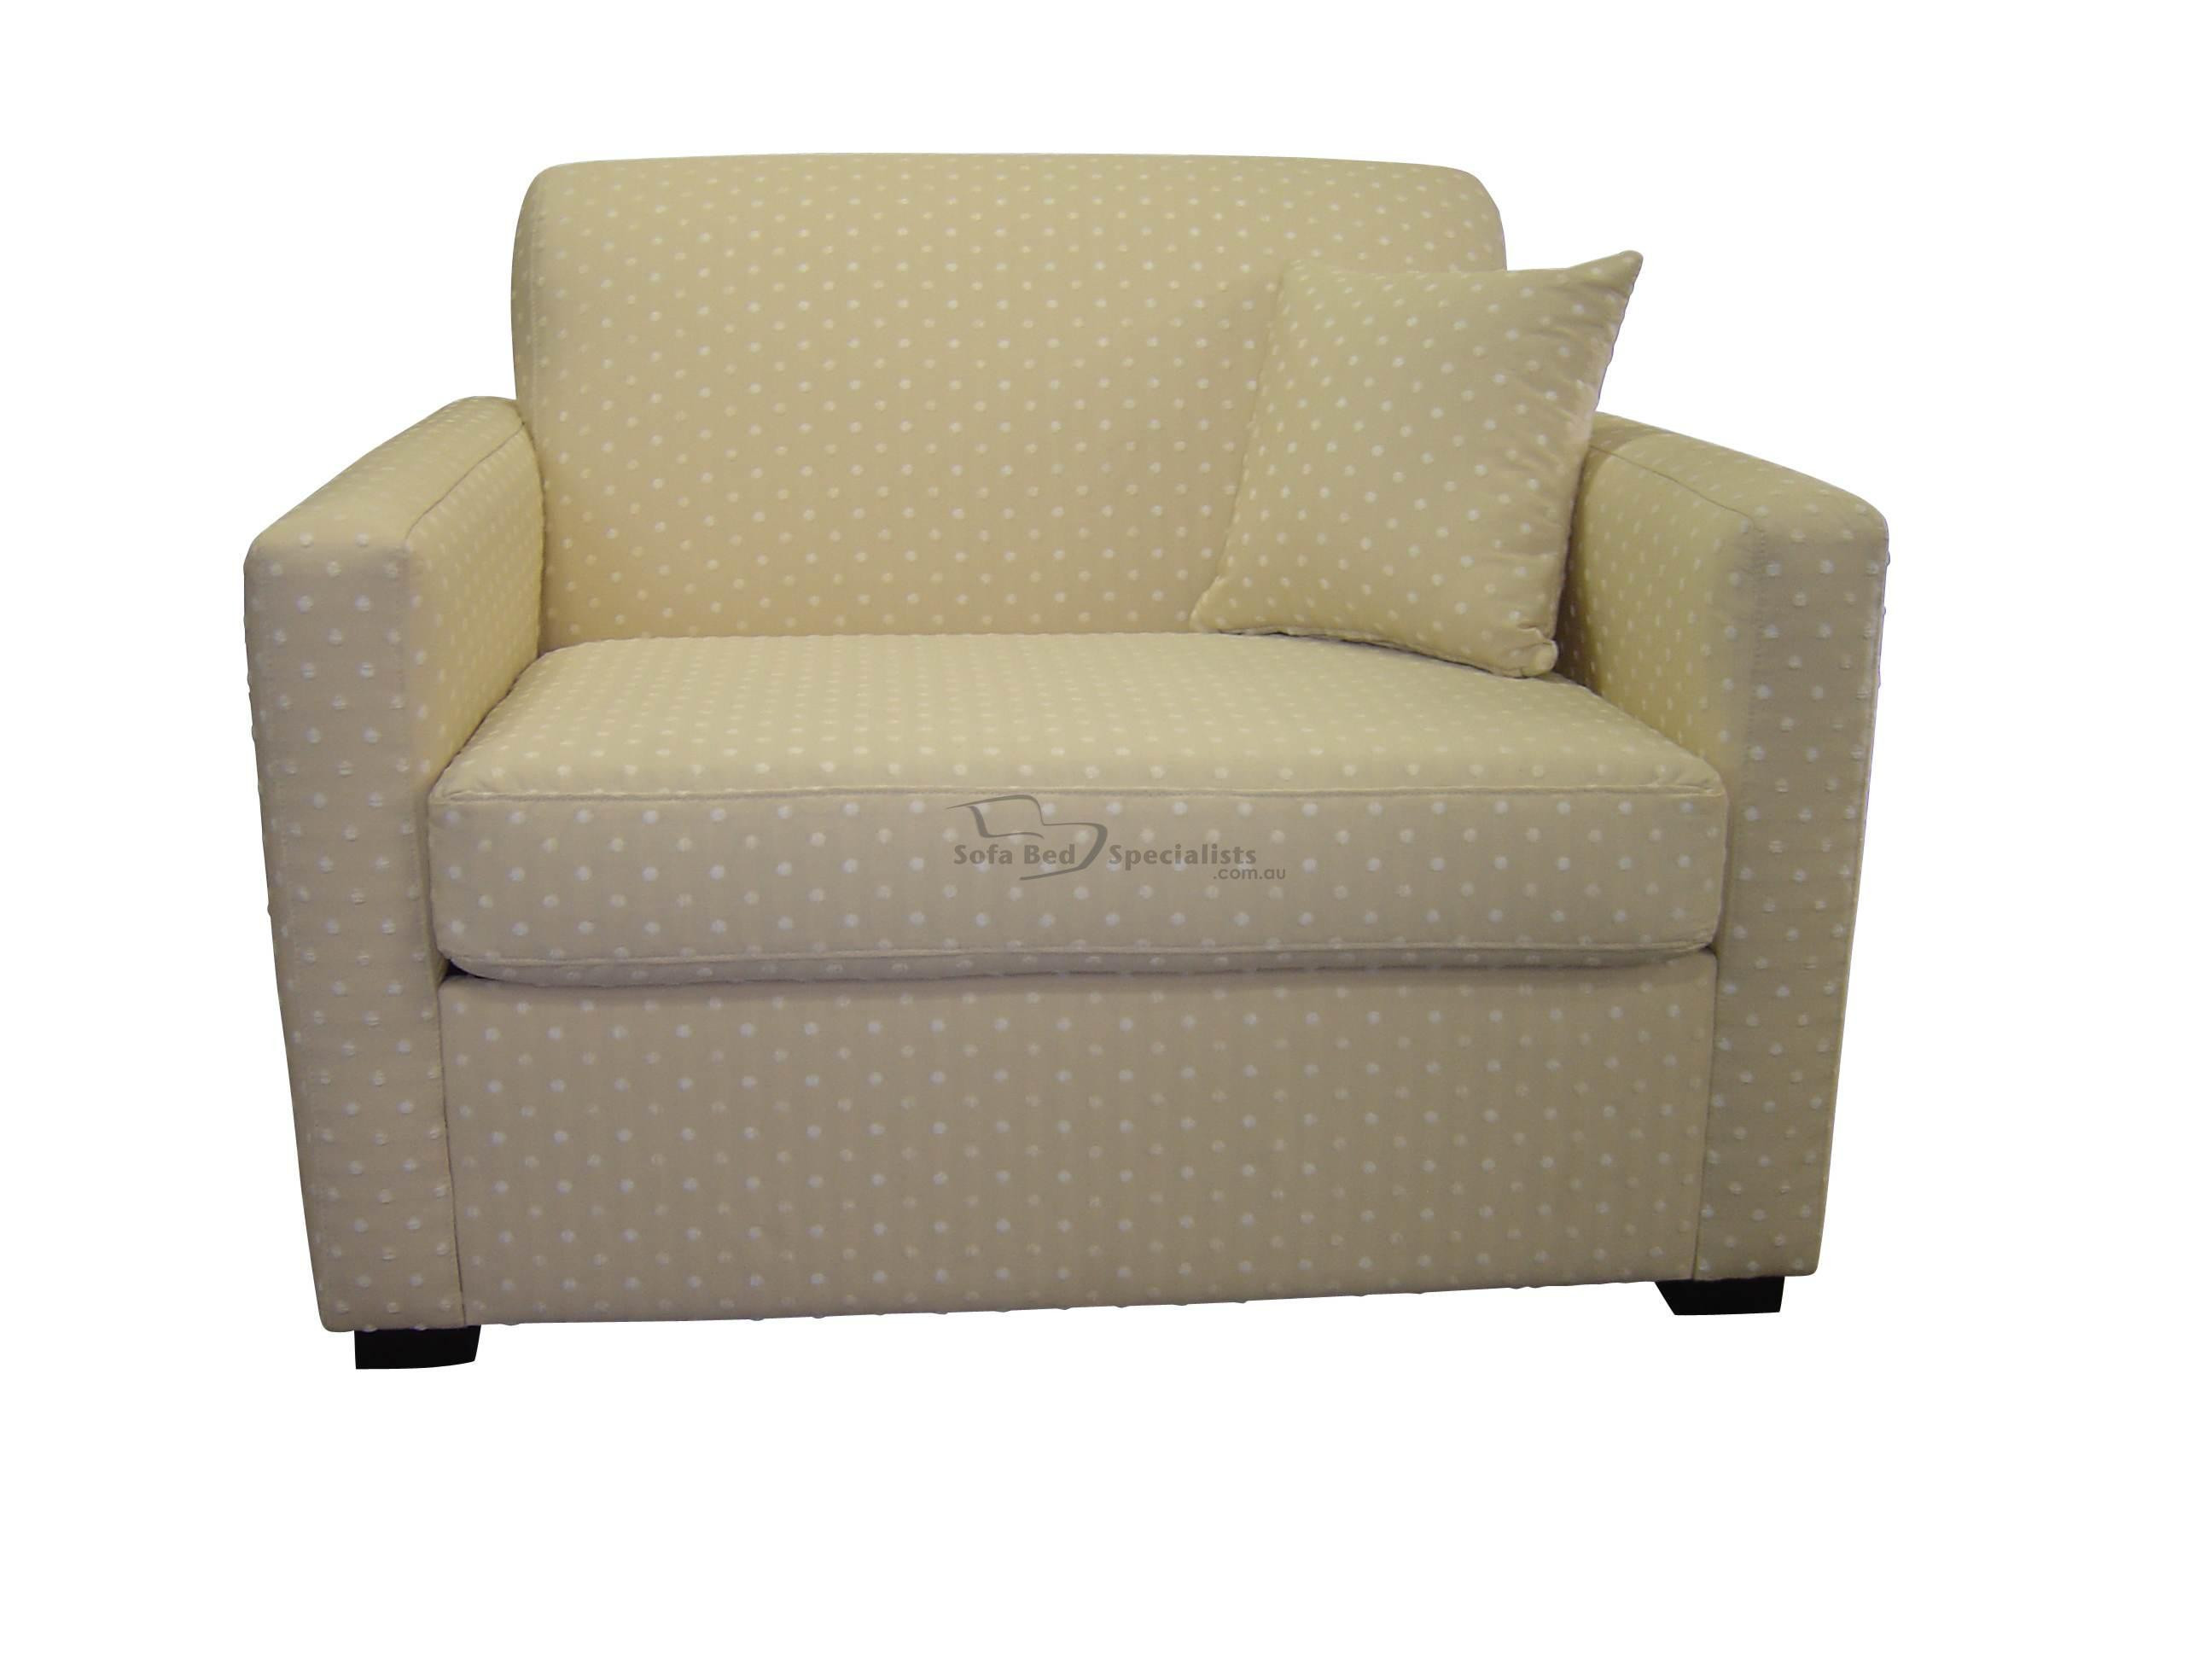 Best ideas about Single Sofa Bed
. Save or Pin Chair Sofabed Bowman Sofa Bed Specialists Now.